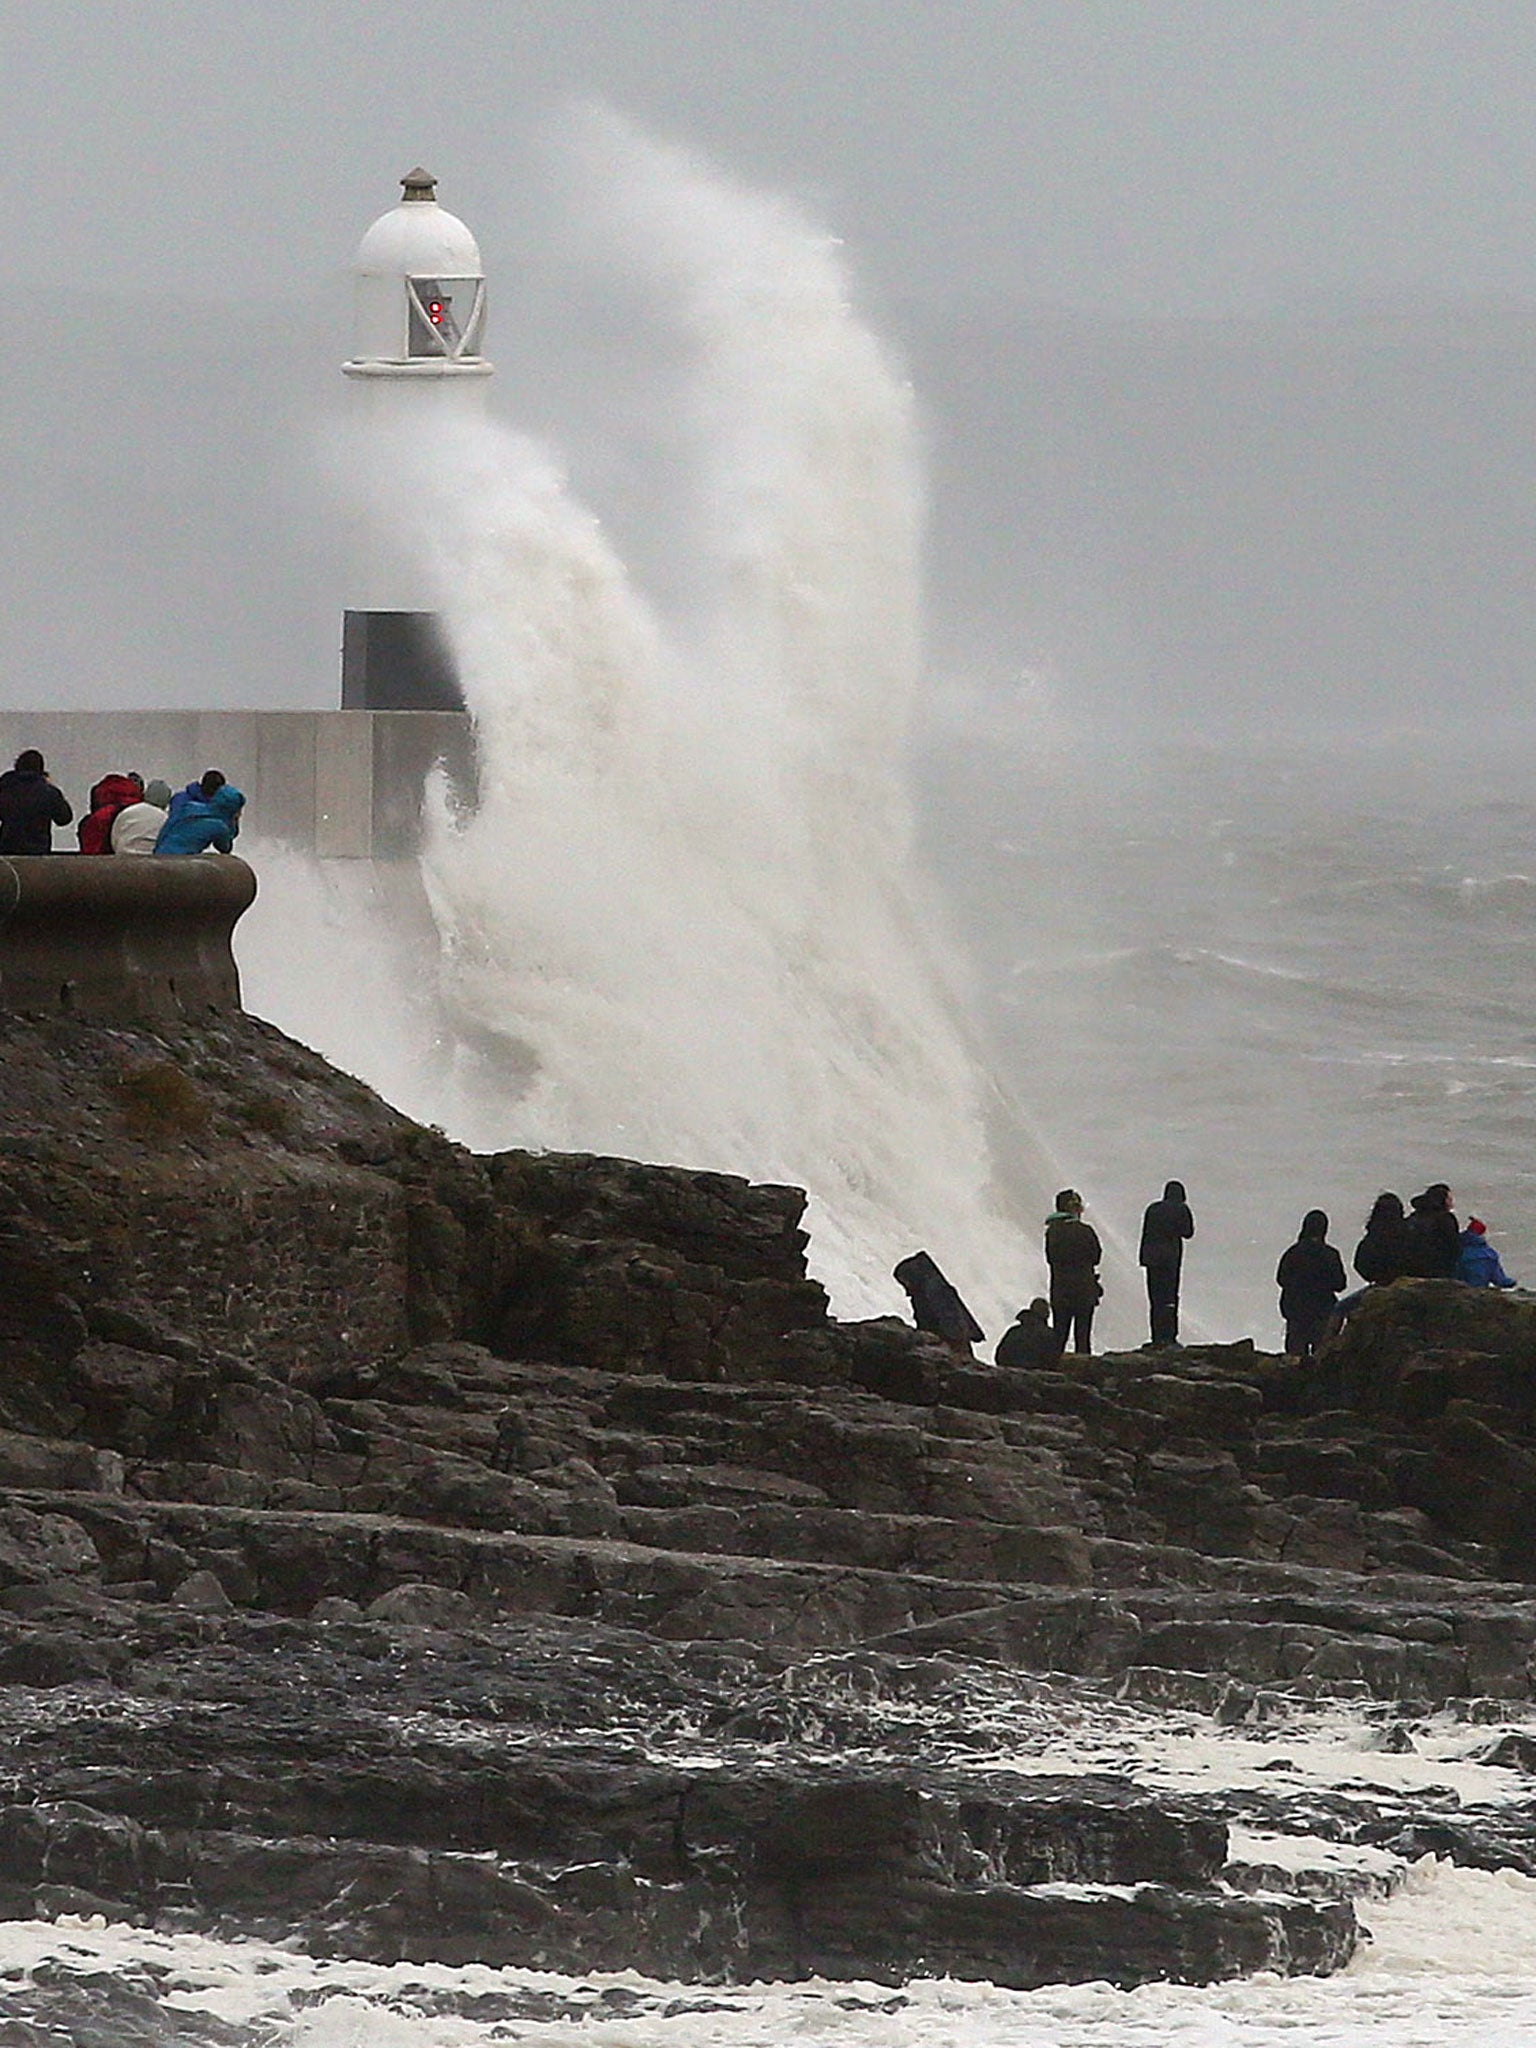 Waves crash against the sea barriers in Porthcawl, south Wales